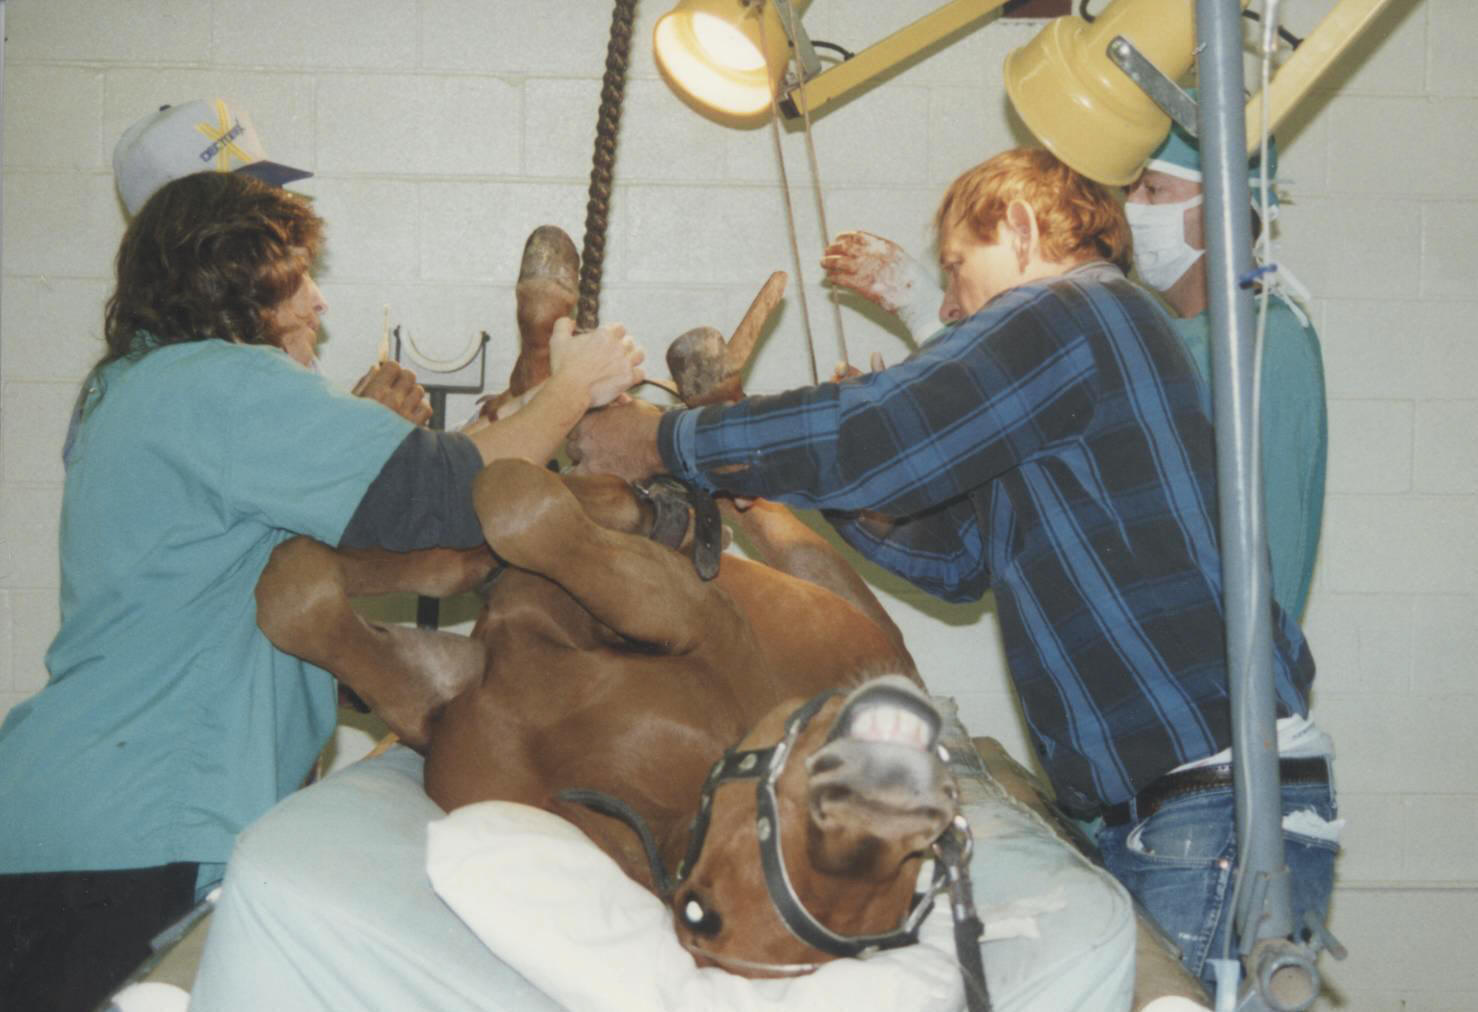 Veterinarians and assistancts position Cowboy for surgery.